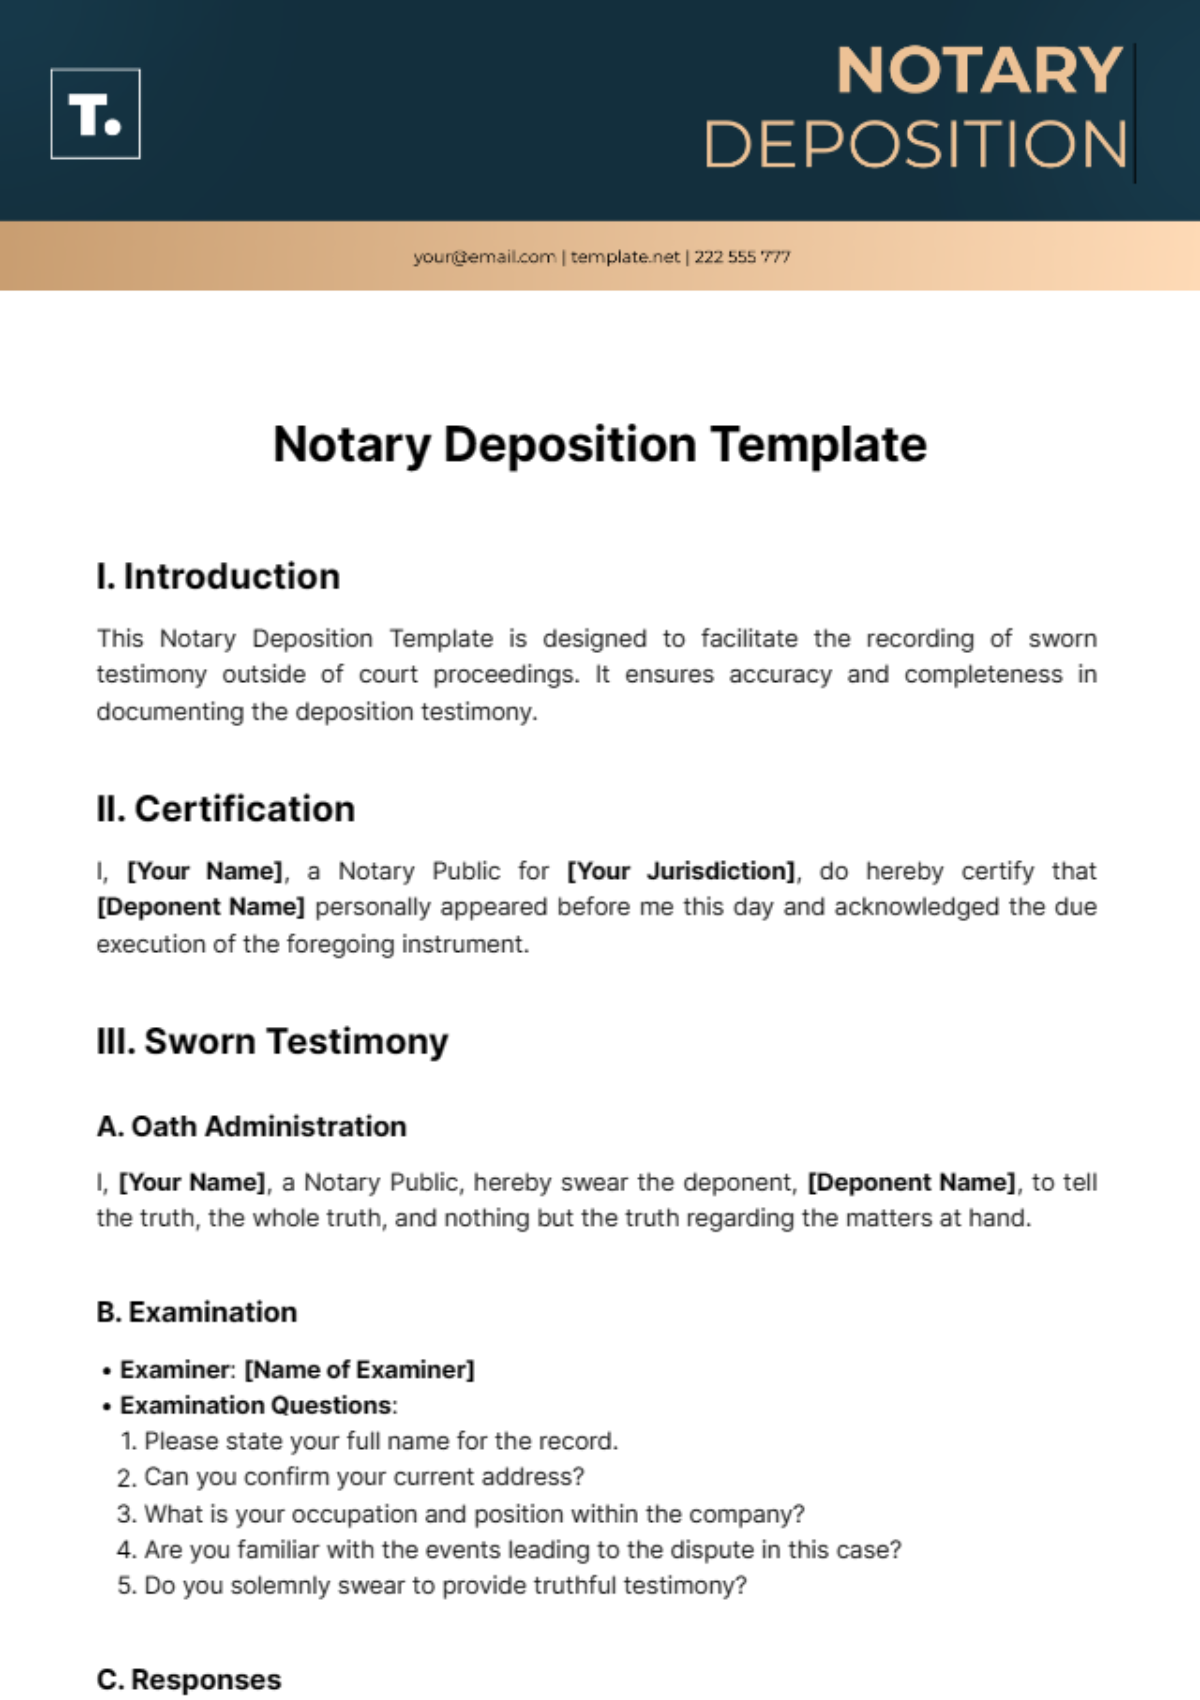 Free Notary Deposition Template